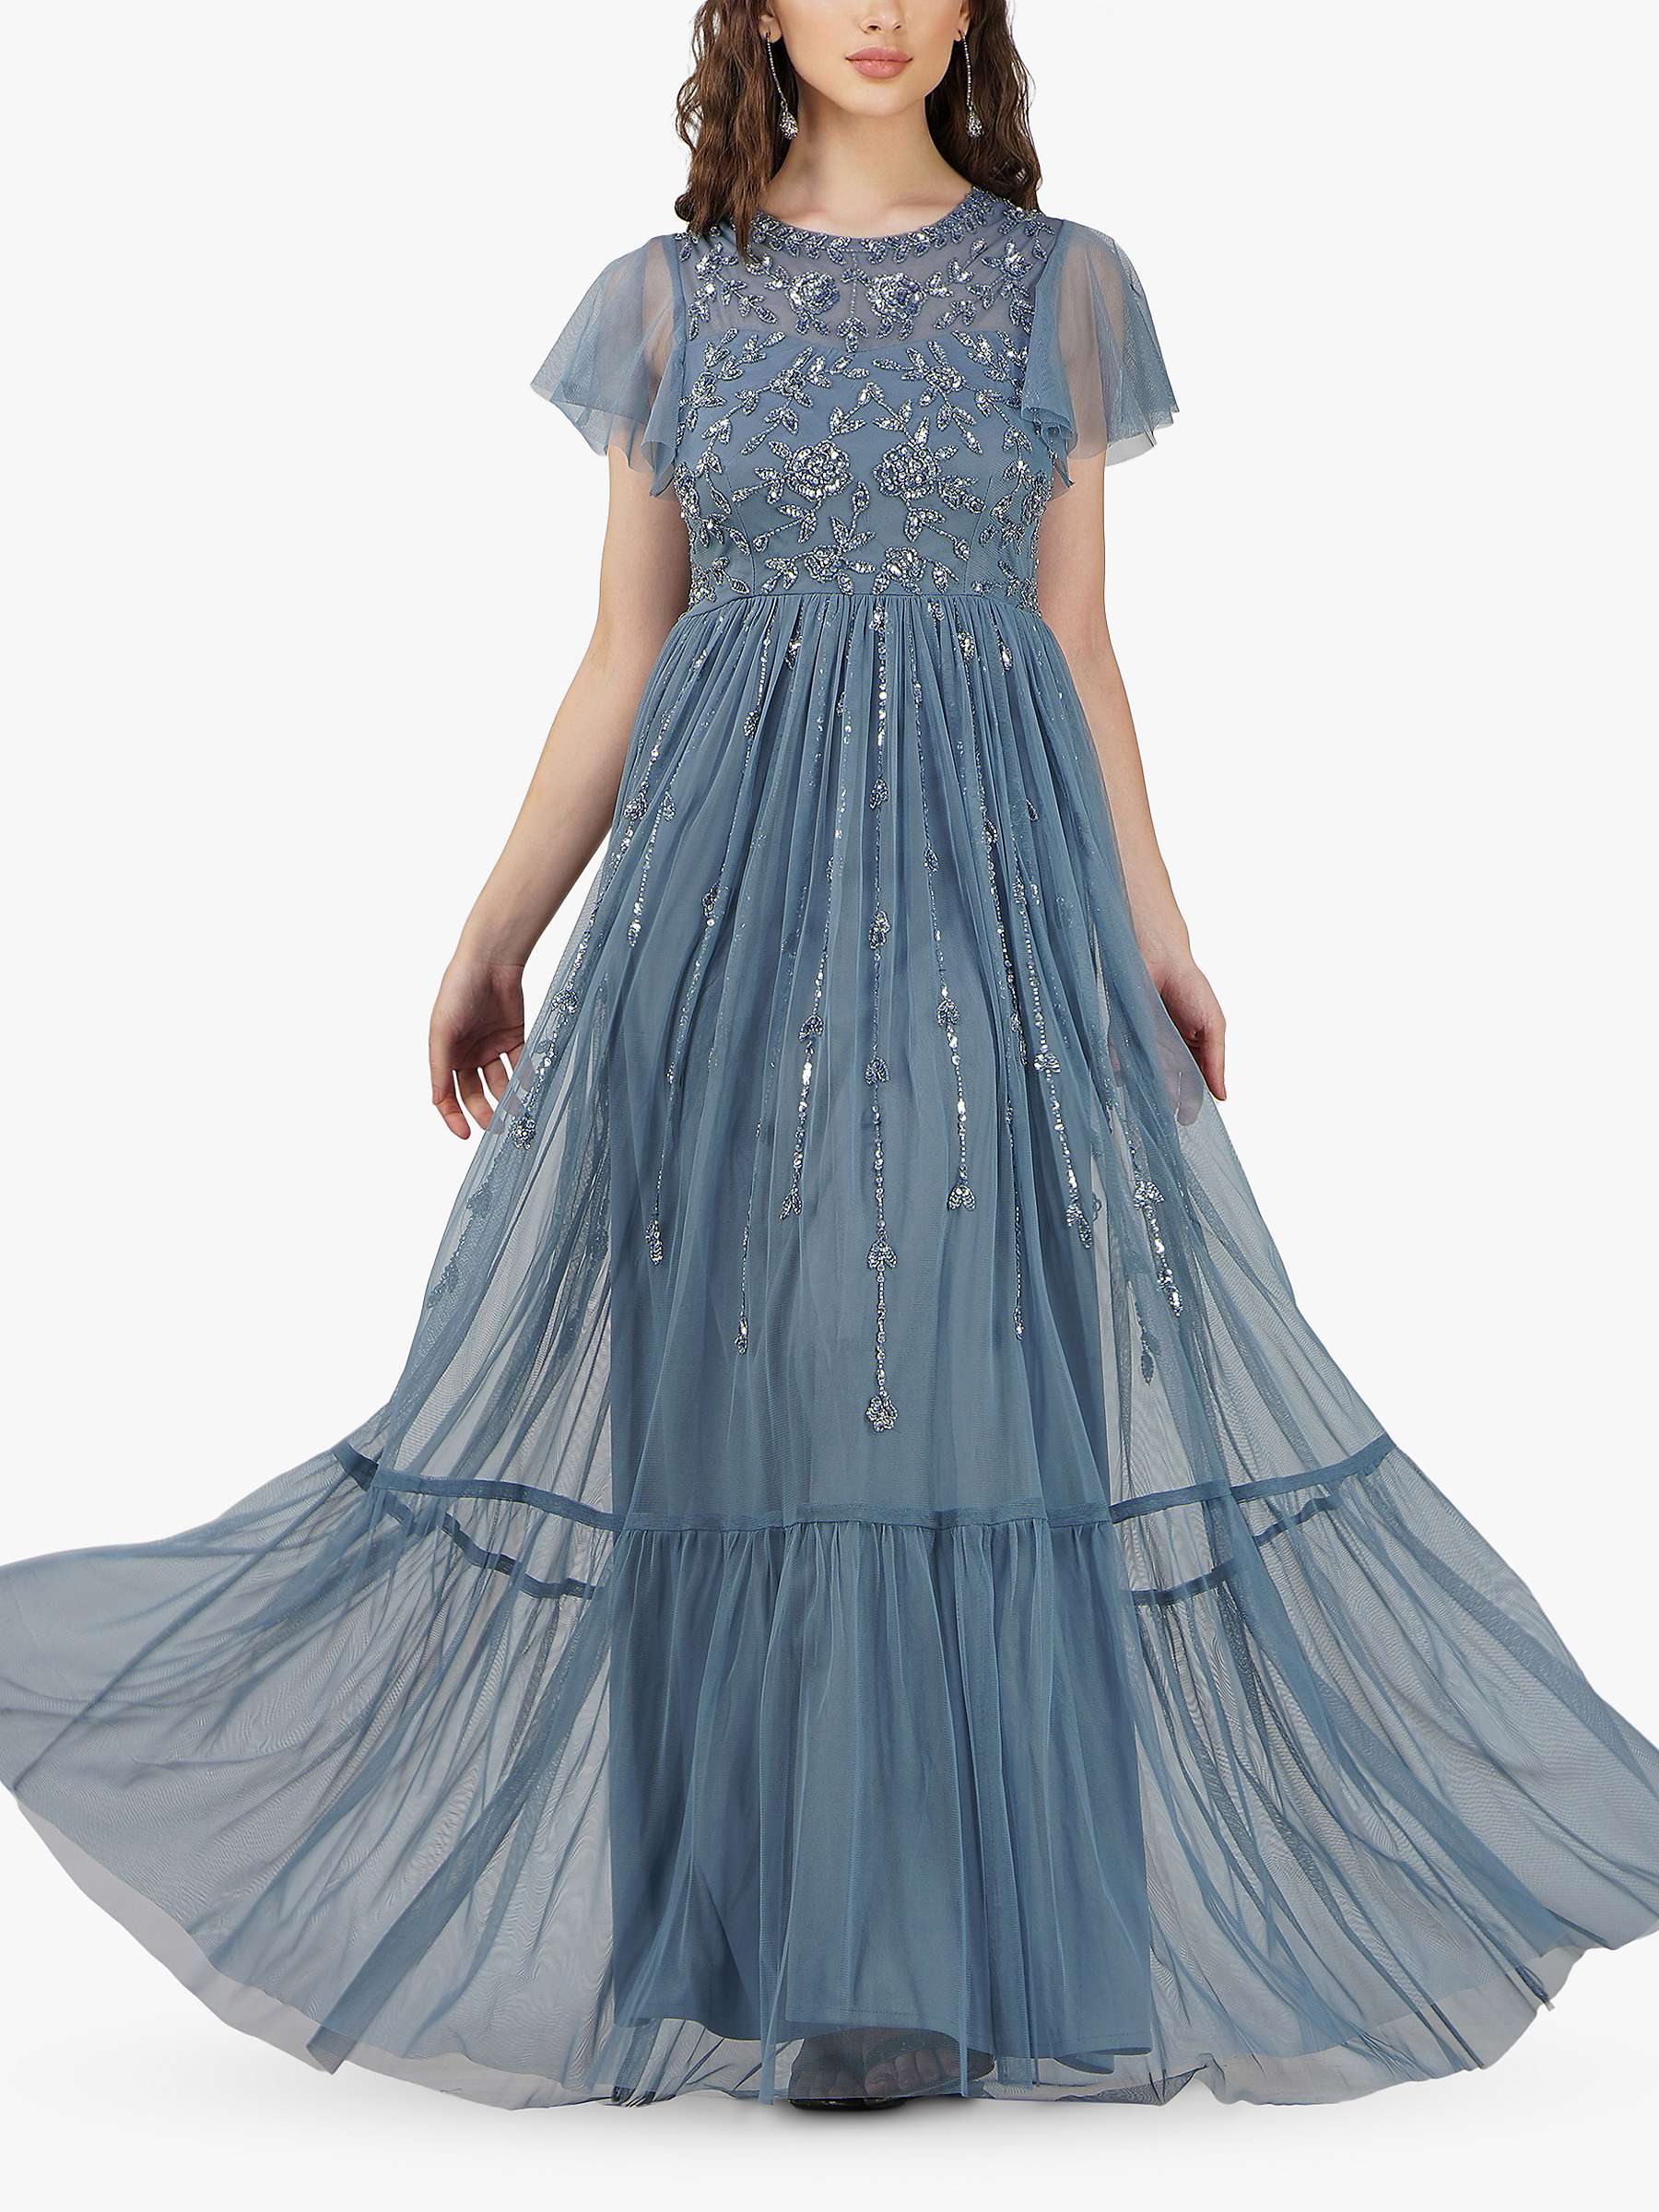 Buy Lace & Beads Marly Embellished Maxi Dress Online at johnlewis.com